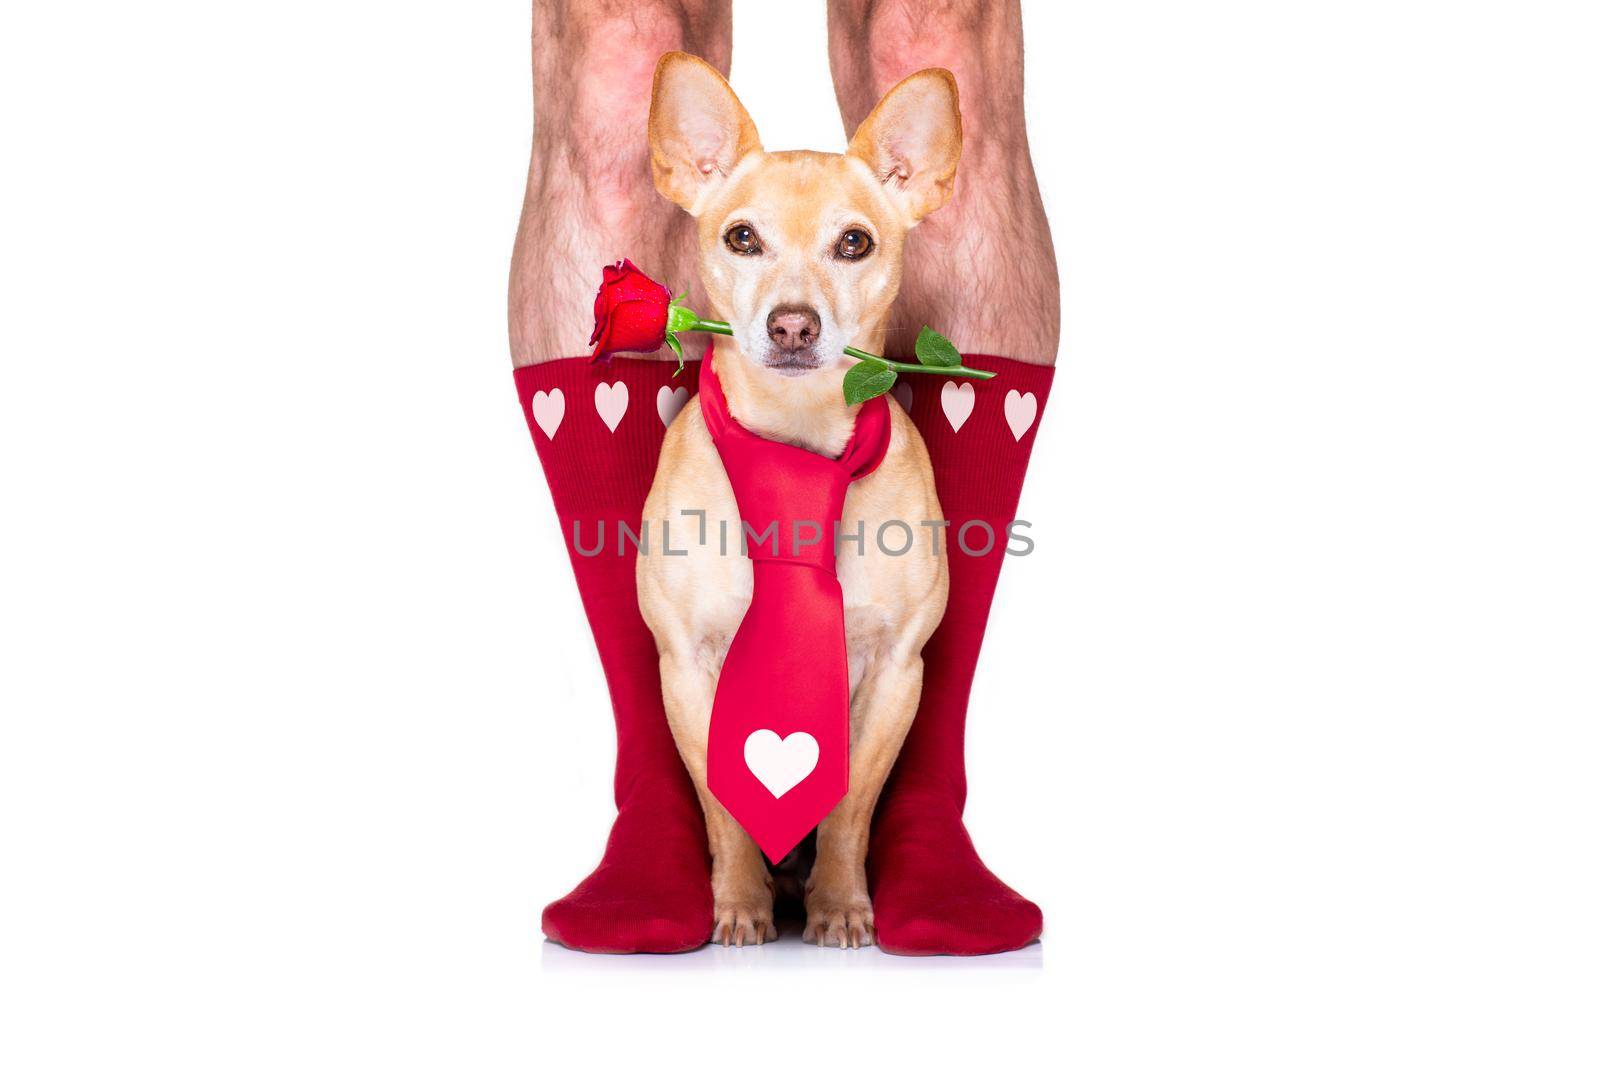 gay wedding couple with chihuahua dog wearing socks, getting maried with red roses all over isolated on white background on valenitnes day